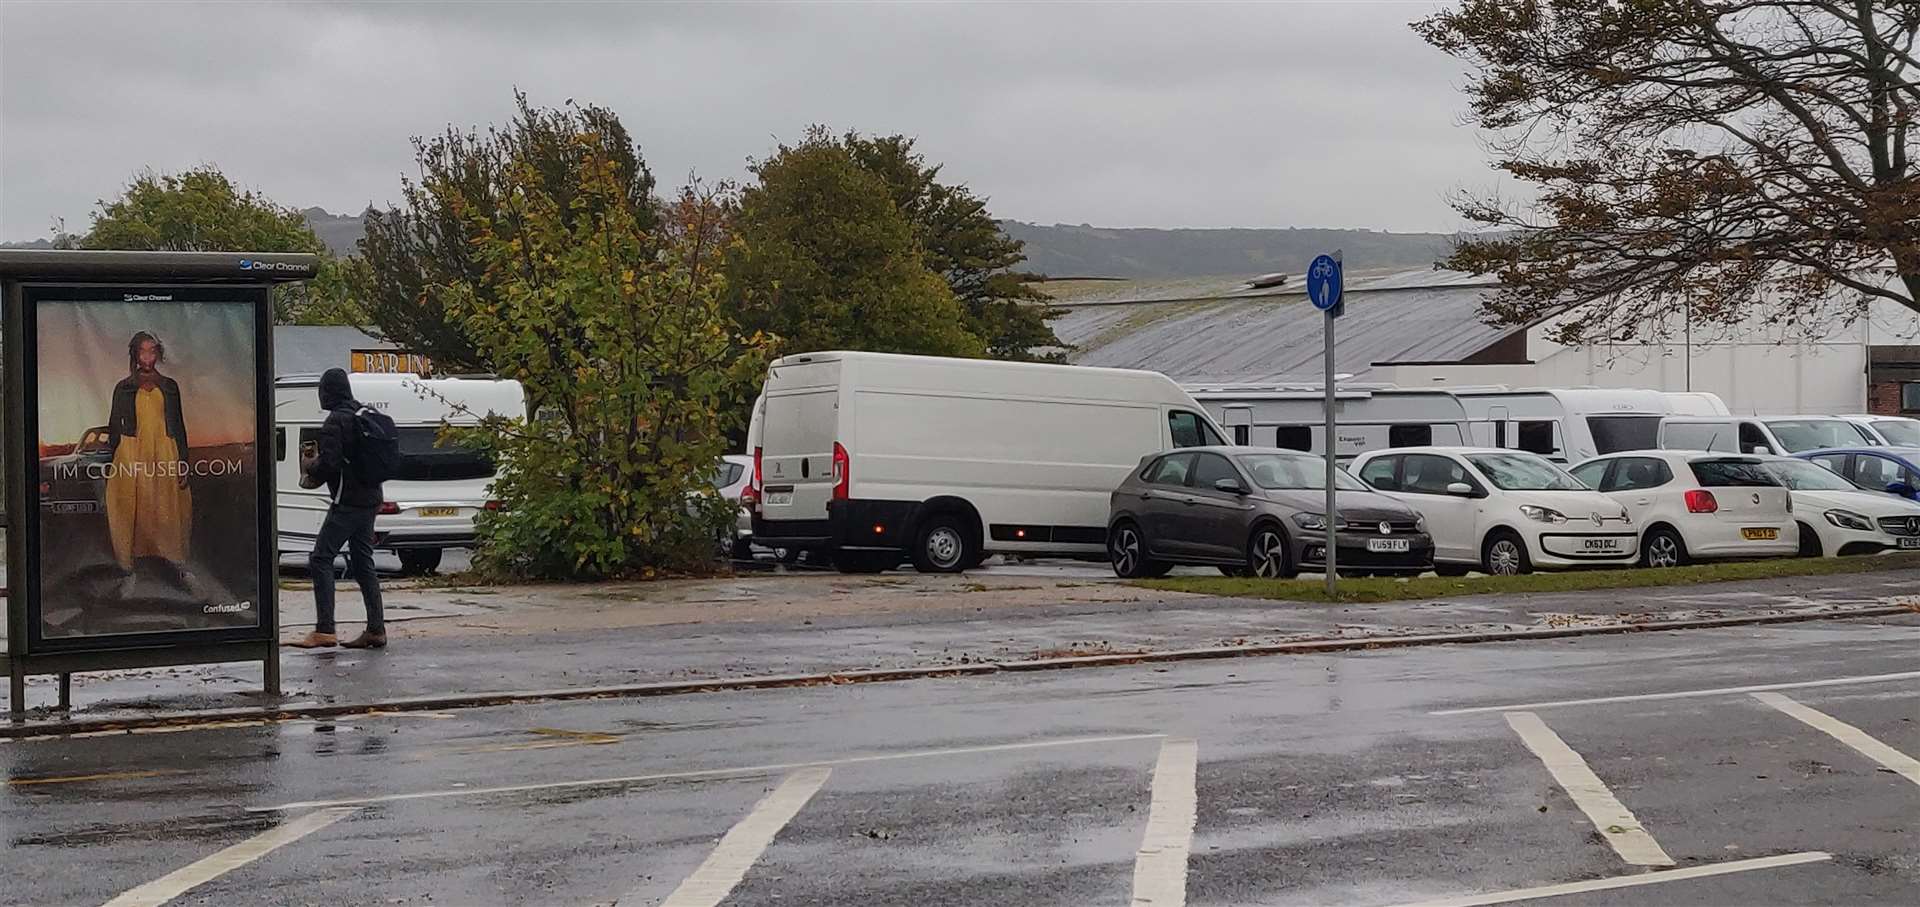 A camp has sprung up in the car park off Cheriton Road, Folkestone. Picture: Rhys Griffiths